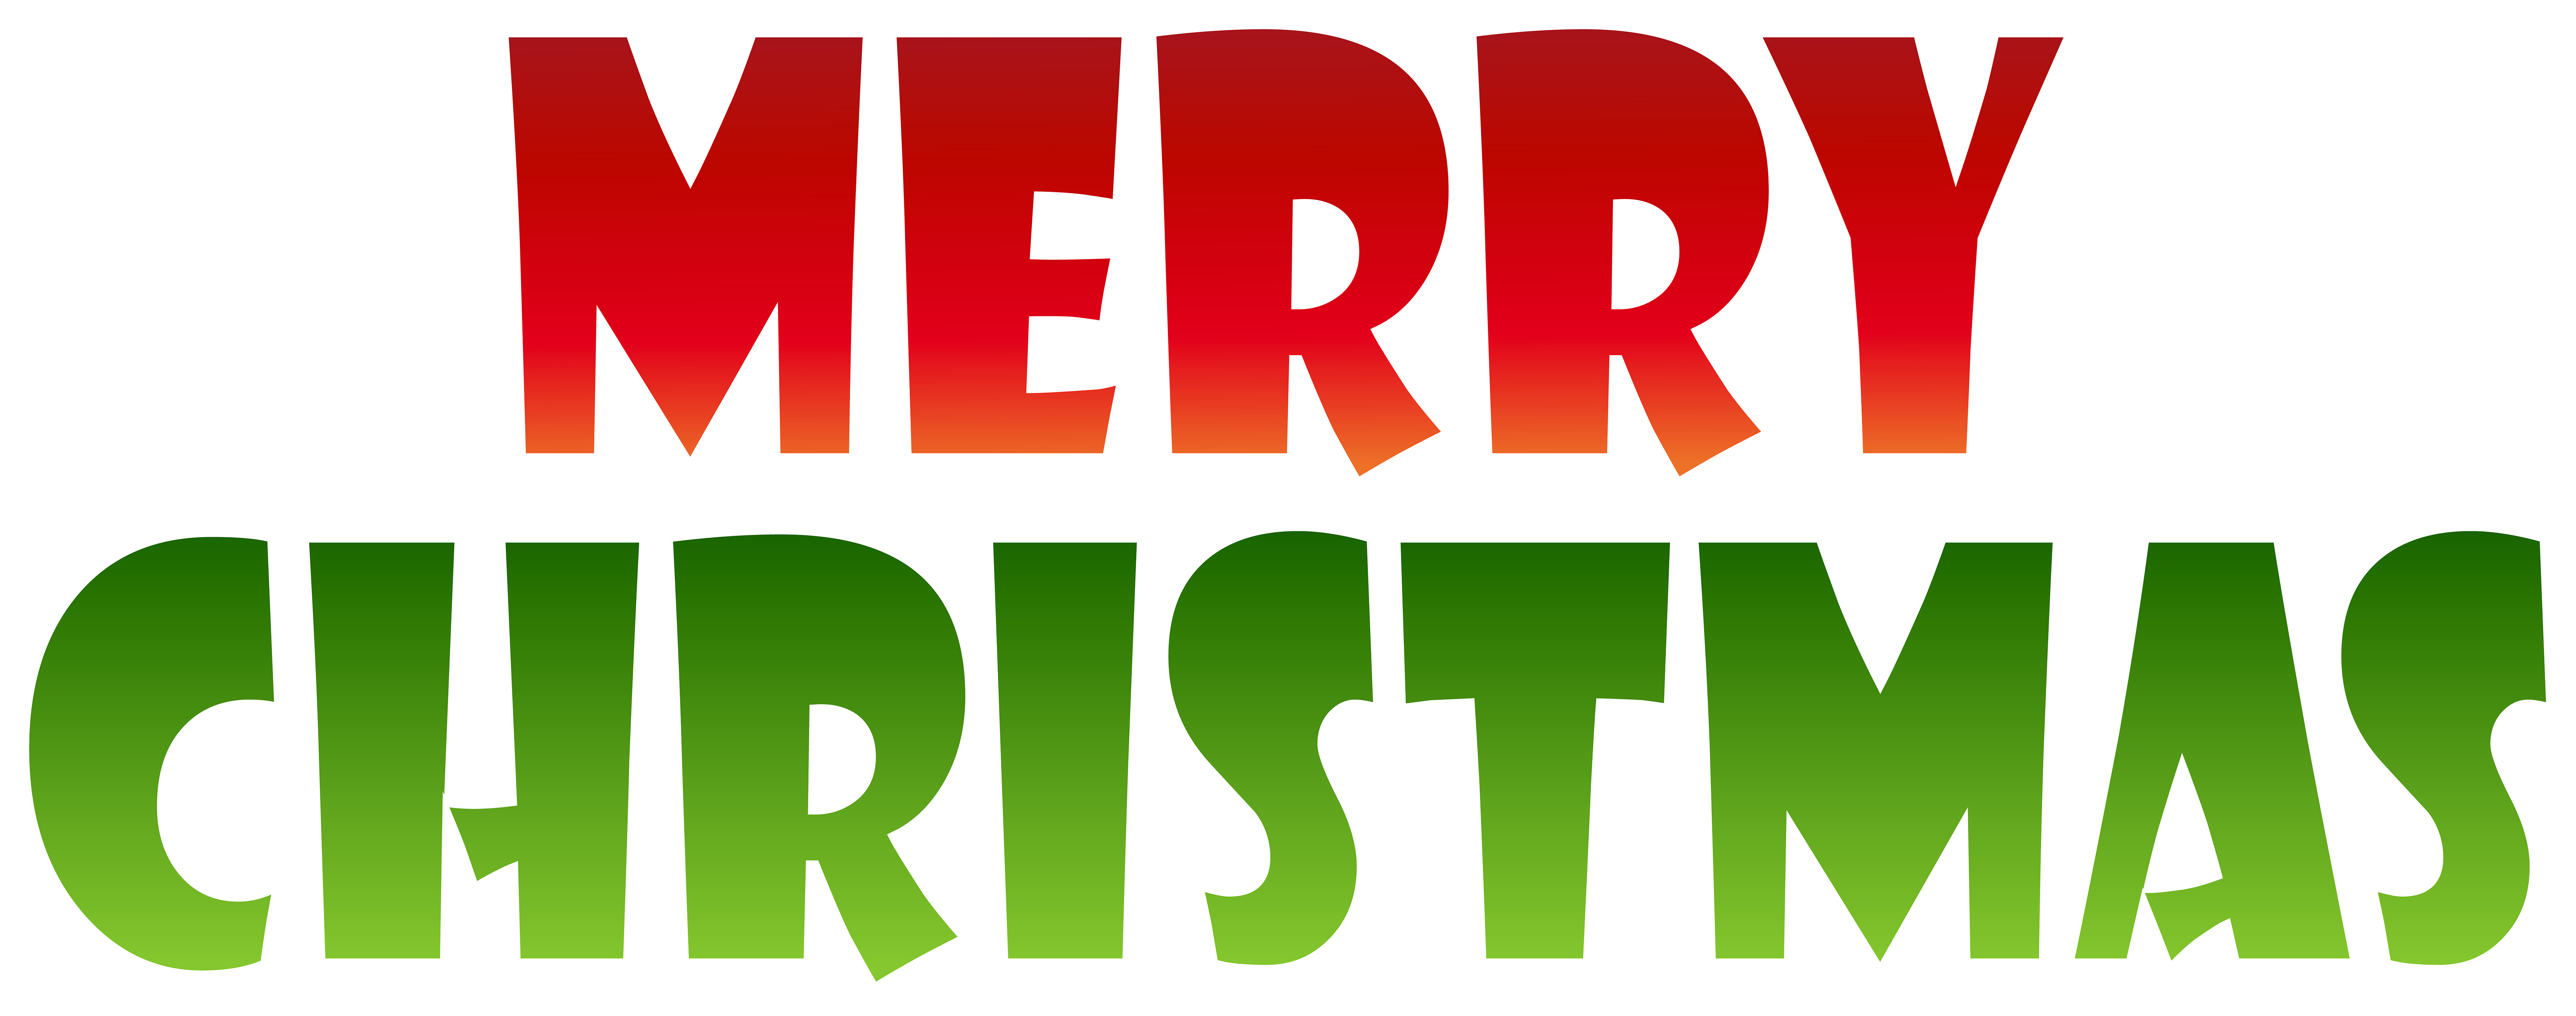 Merry Christmas Deco Text PNG Clipart | Gallery Yopriceville - High ...